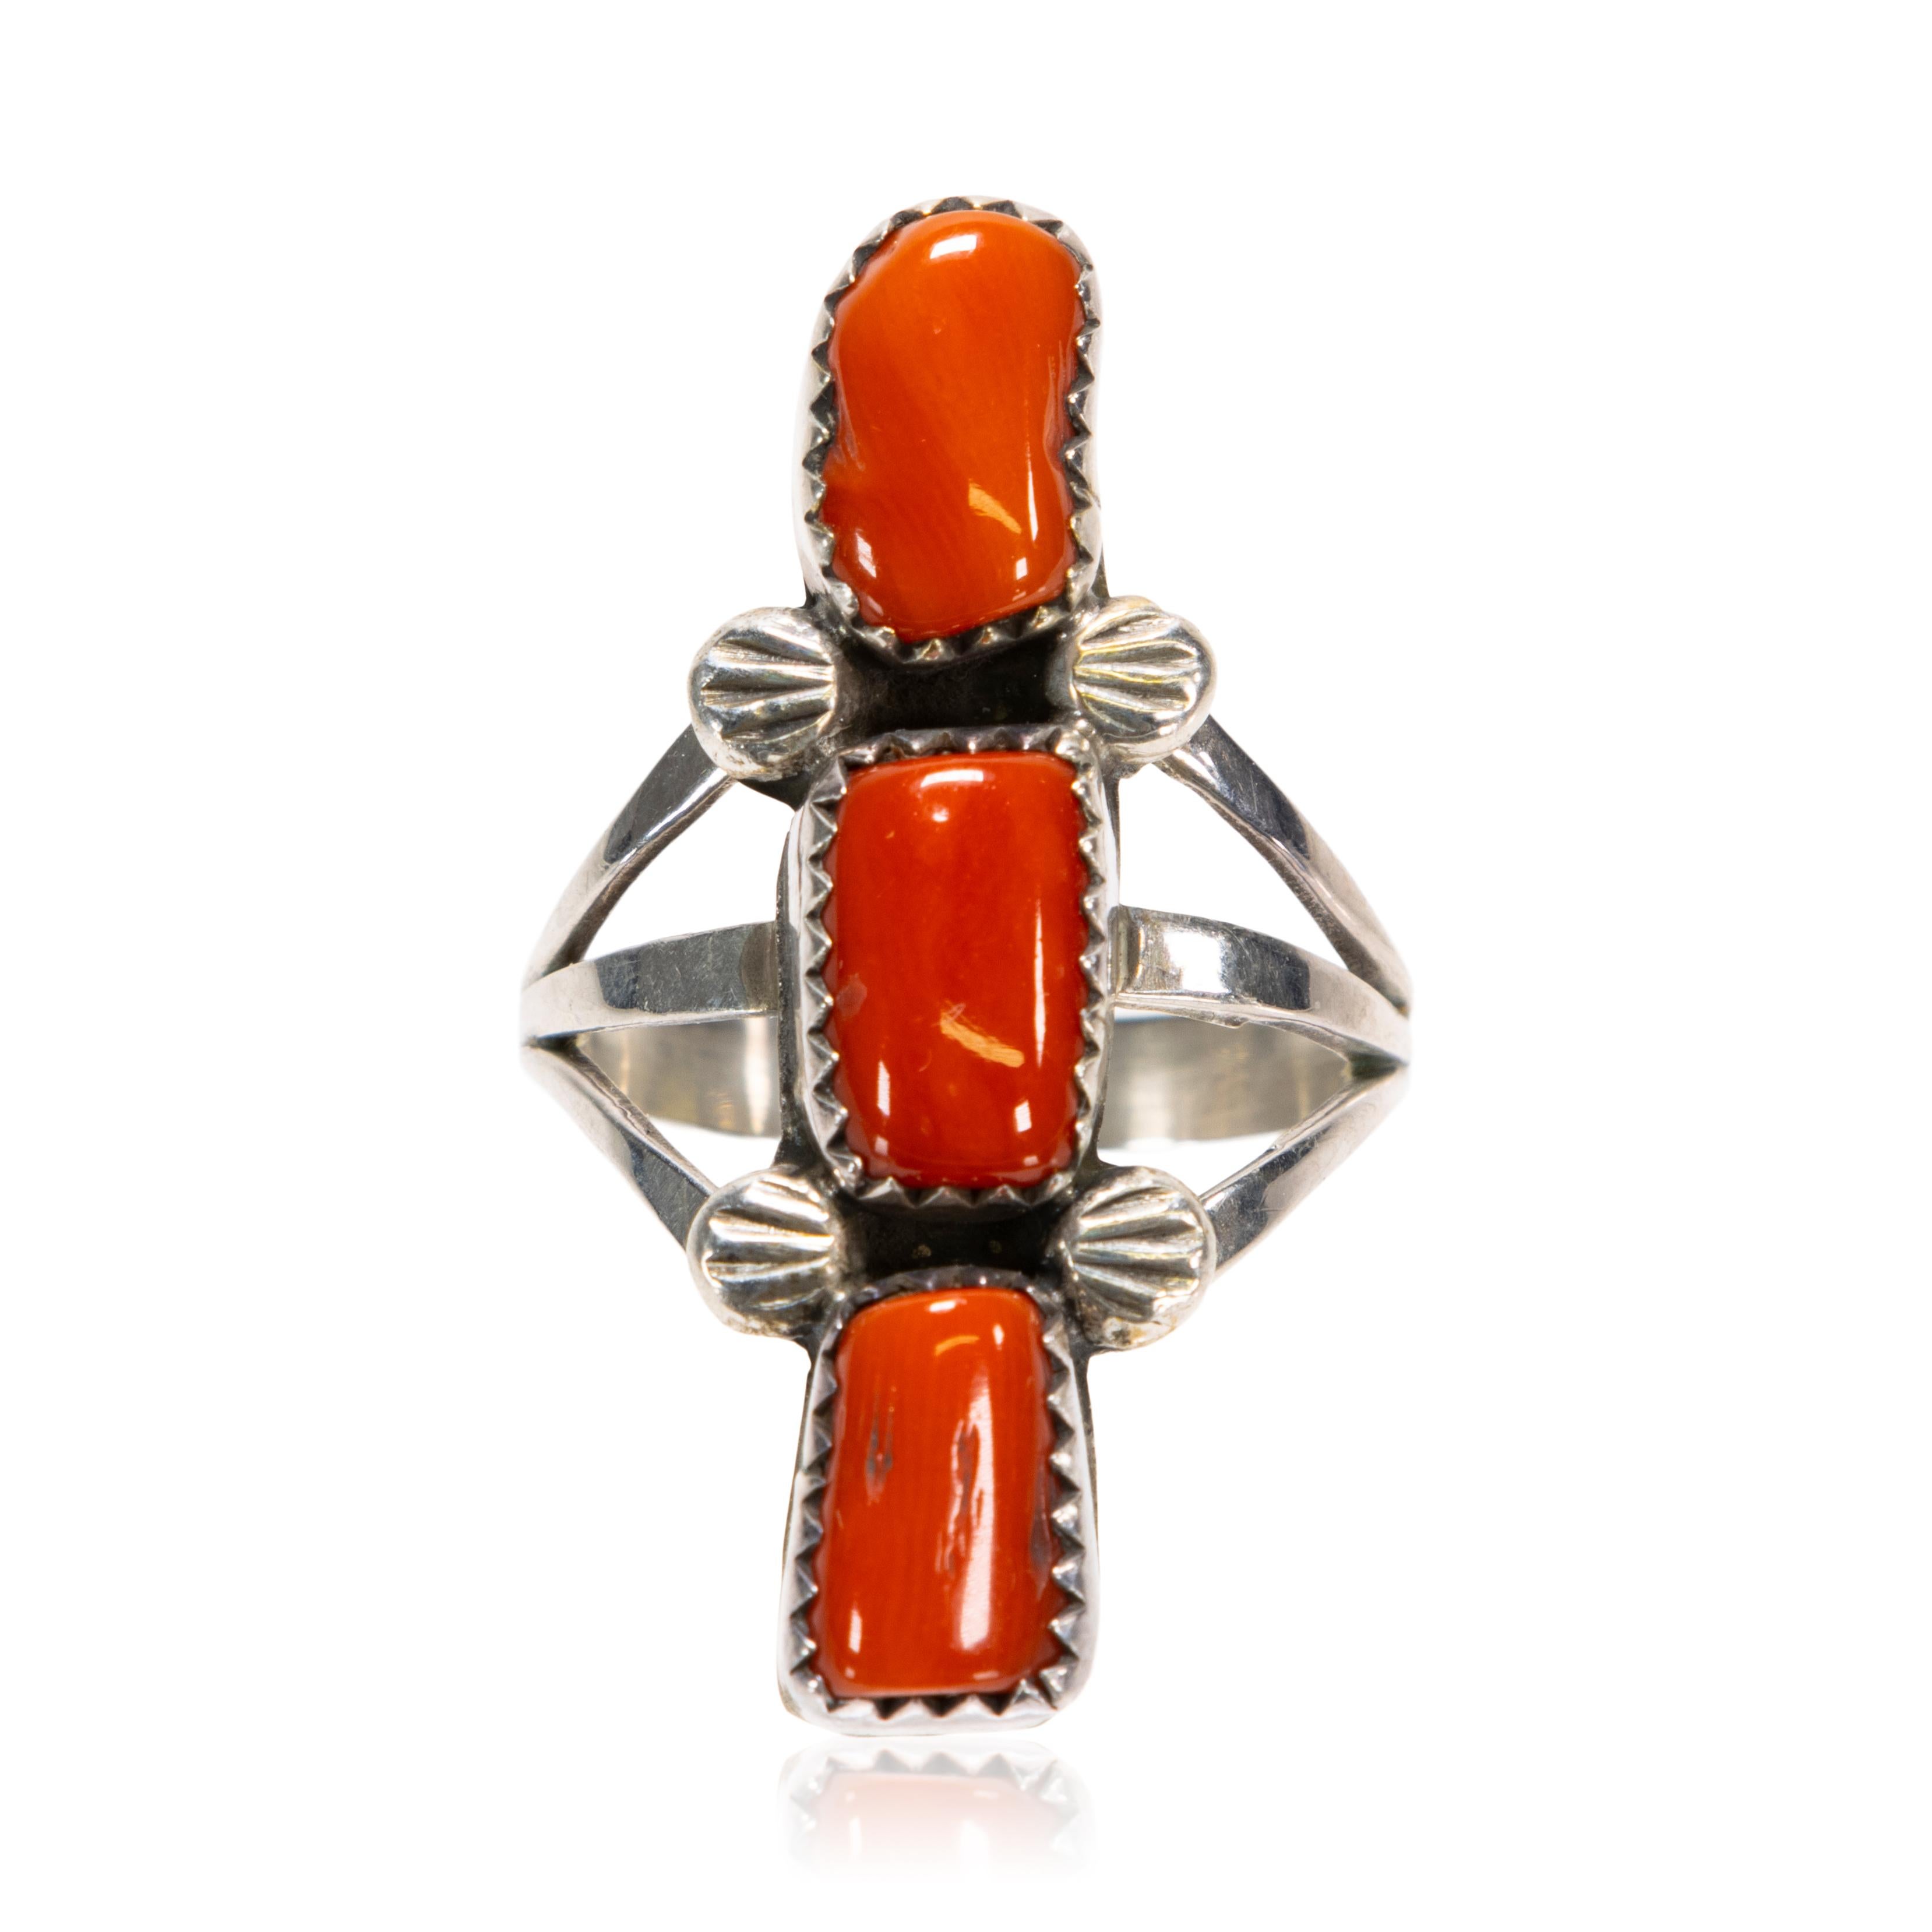 Philip J. Morse Chippewa coral and sterling silver elongated ring. Features three coral cabochon gemstones from the Ojibwe National, specifically the Sault Ste Marie Tribe of the Chippewa Indians. Signed PM Sterling.

PERIOD: Mid 20th